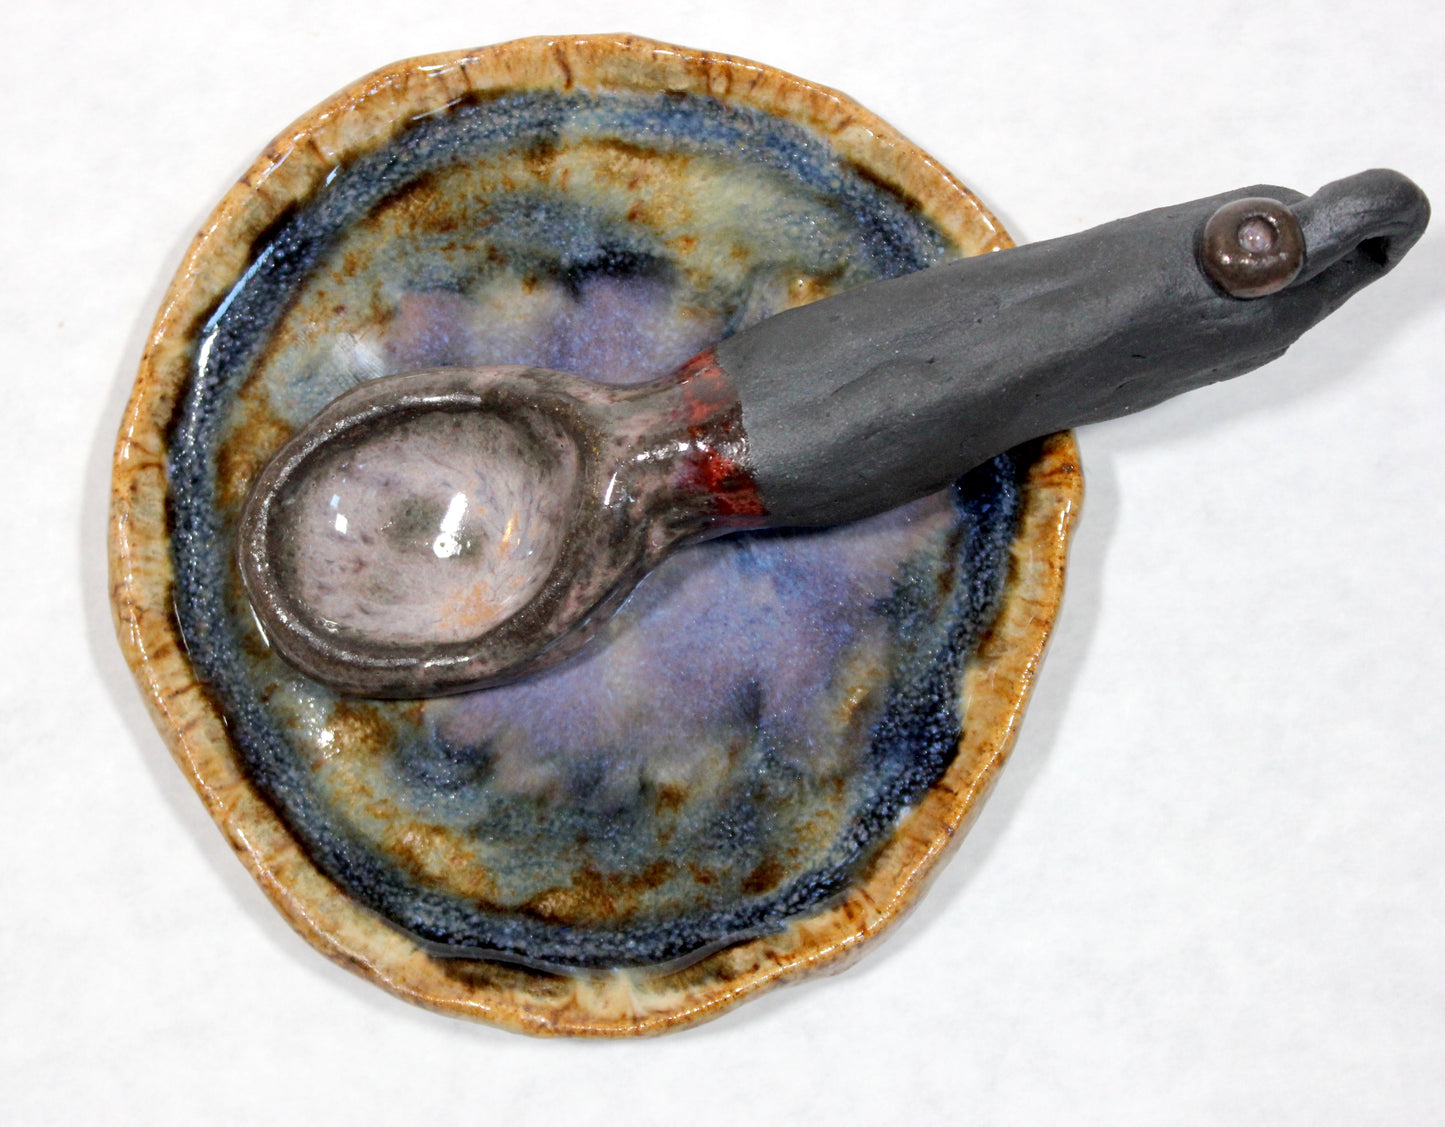 Middle Earth Inspired Decorative or Useable Spoon & Saucer Set